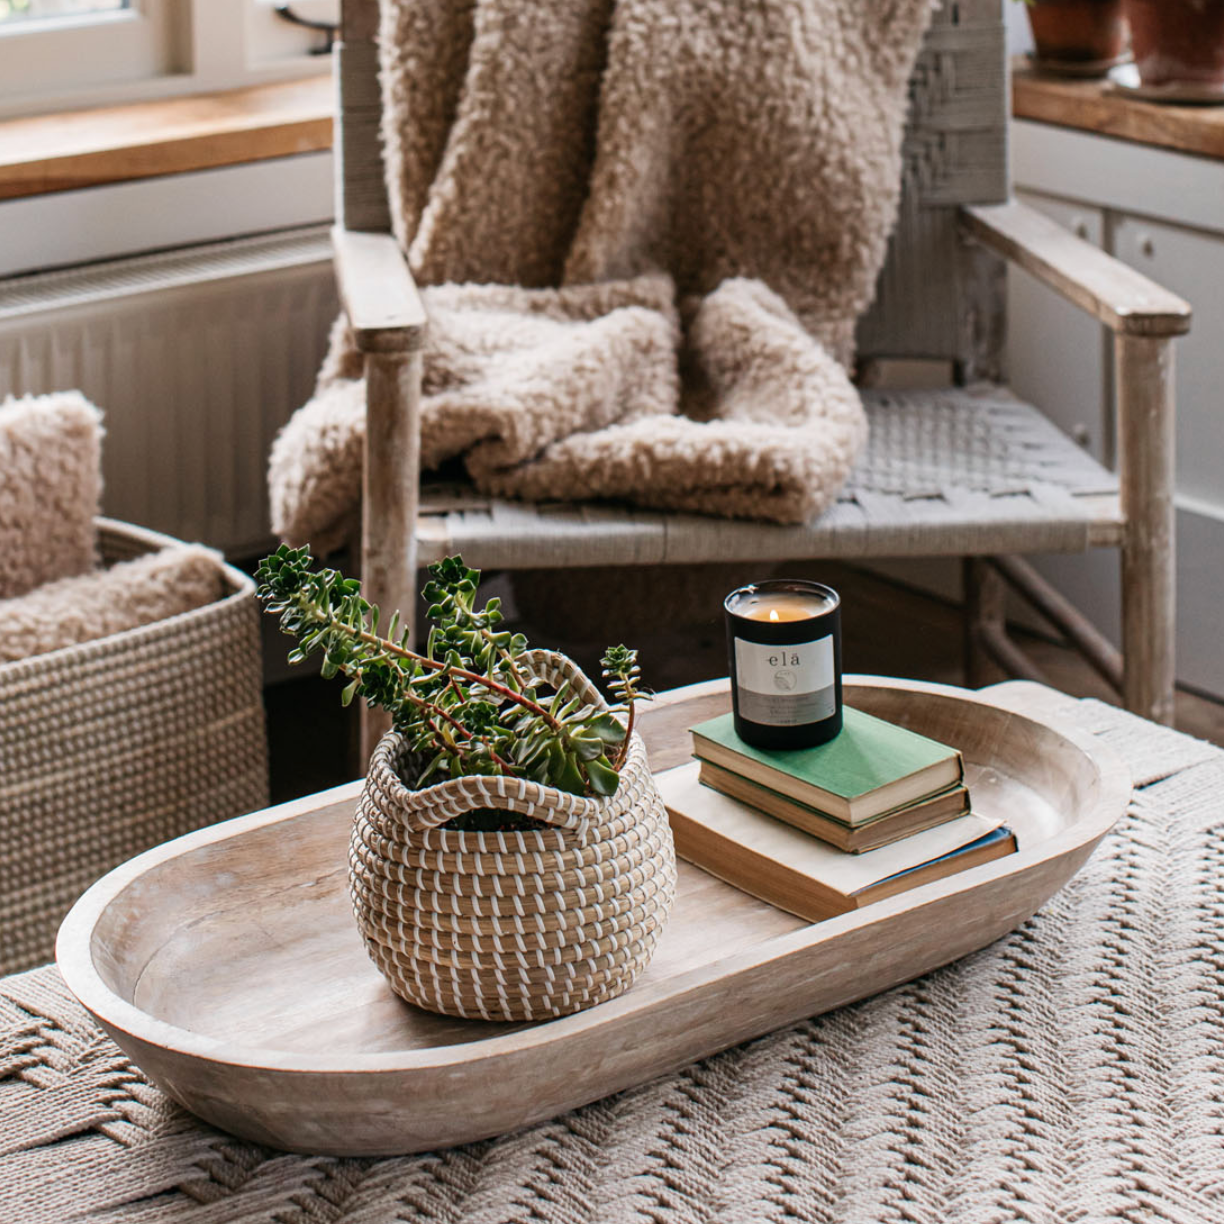 An oval mango wood tray with plant and books is positioned on a woven coffee table.